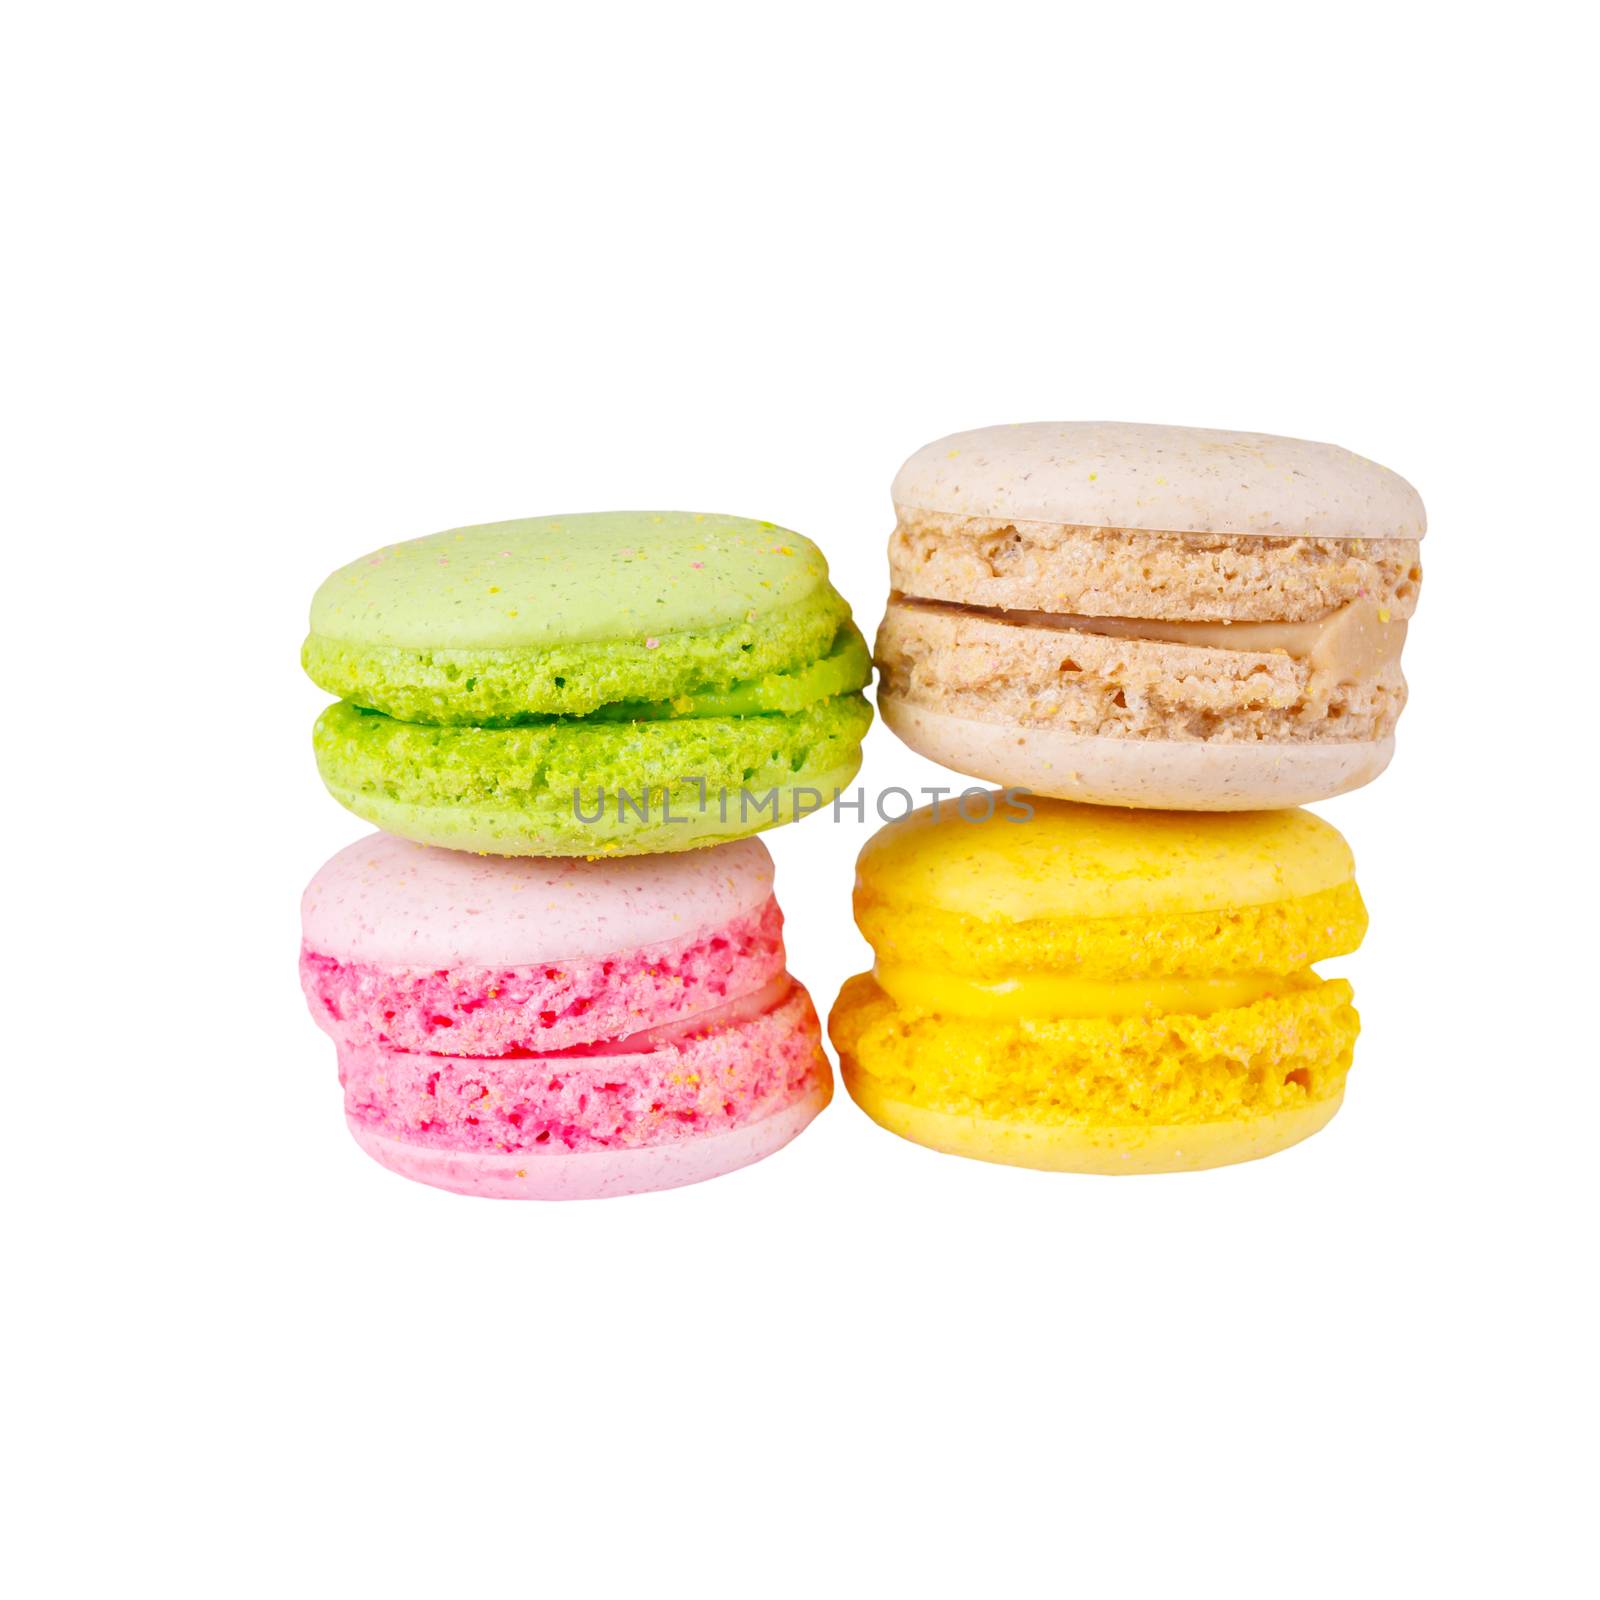 traditional french colorful macaron by FrameAngel